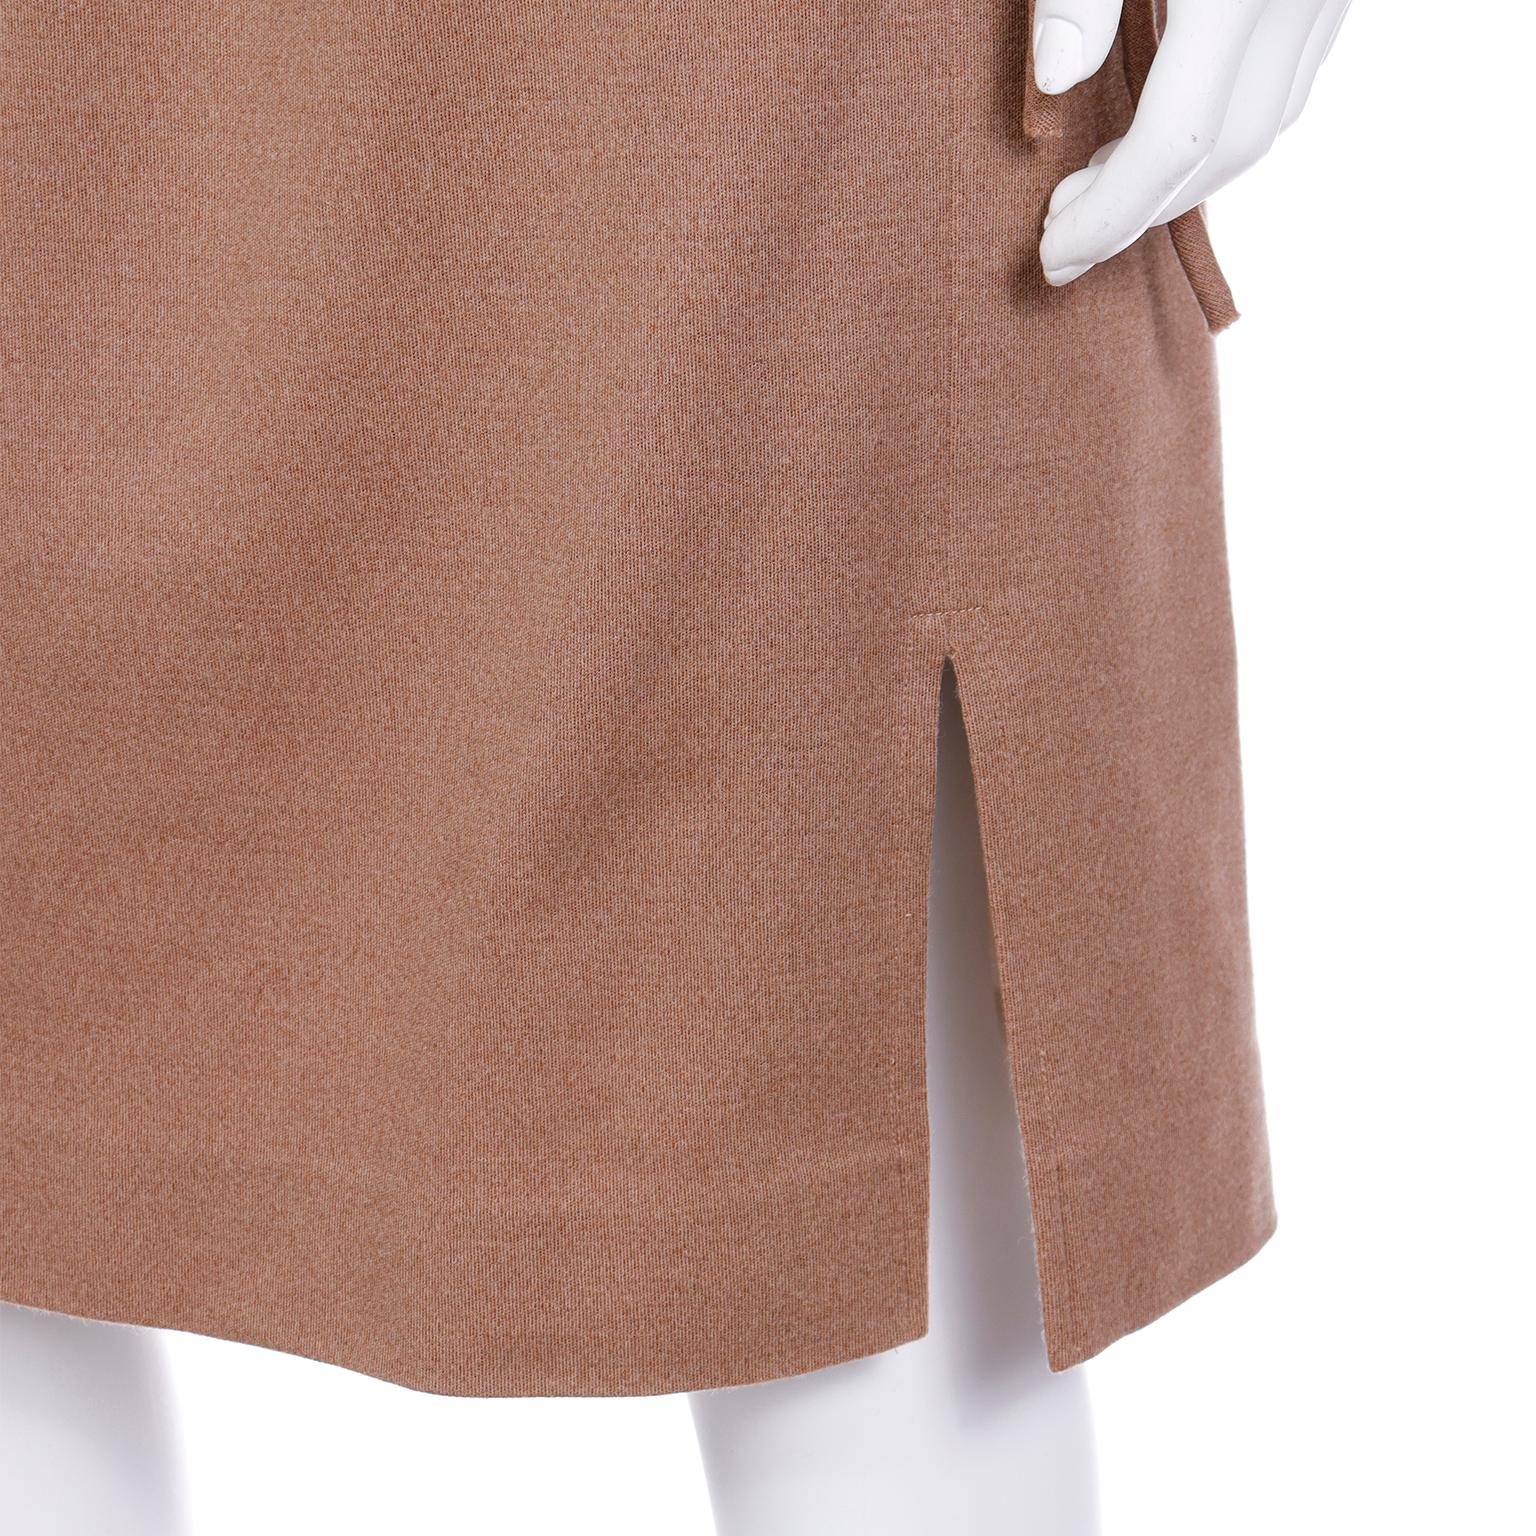 1970s Vintage Bill Blass 2Pc Camel Knit Outfit With Drawstring Top & Skirt 5